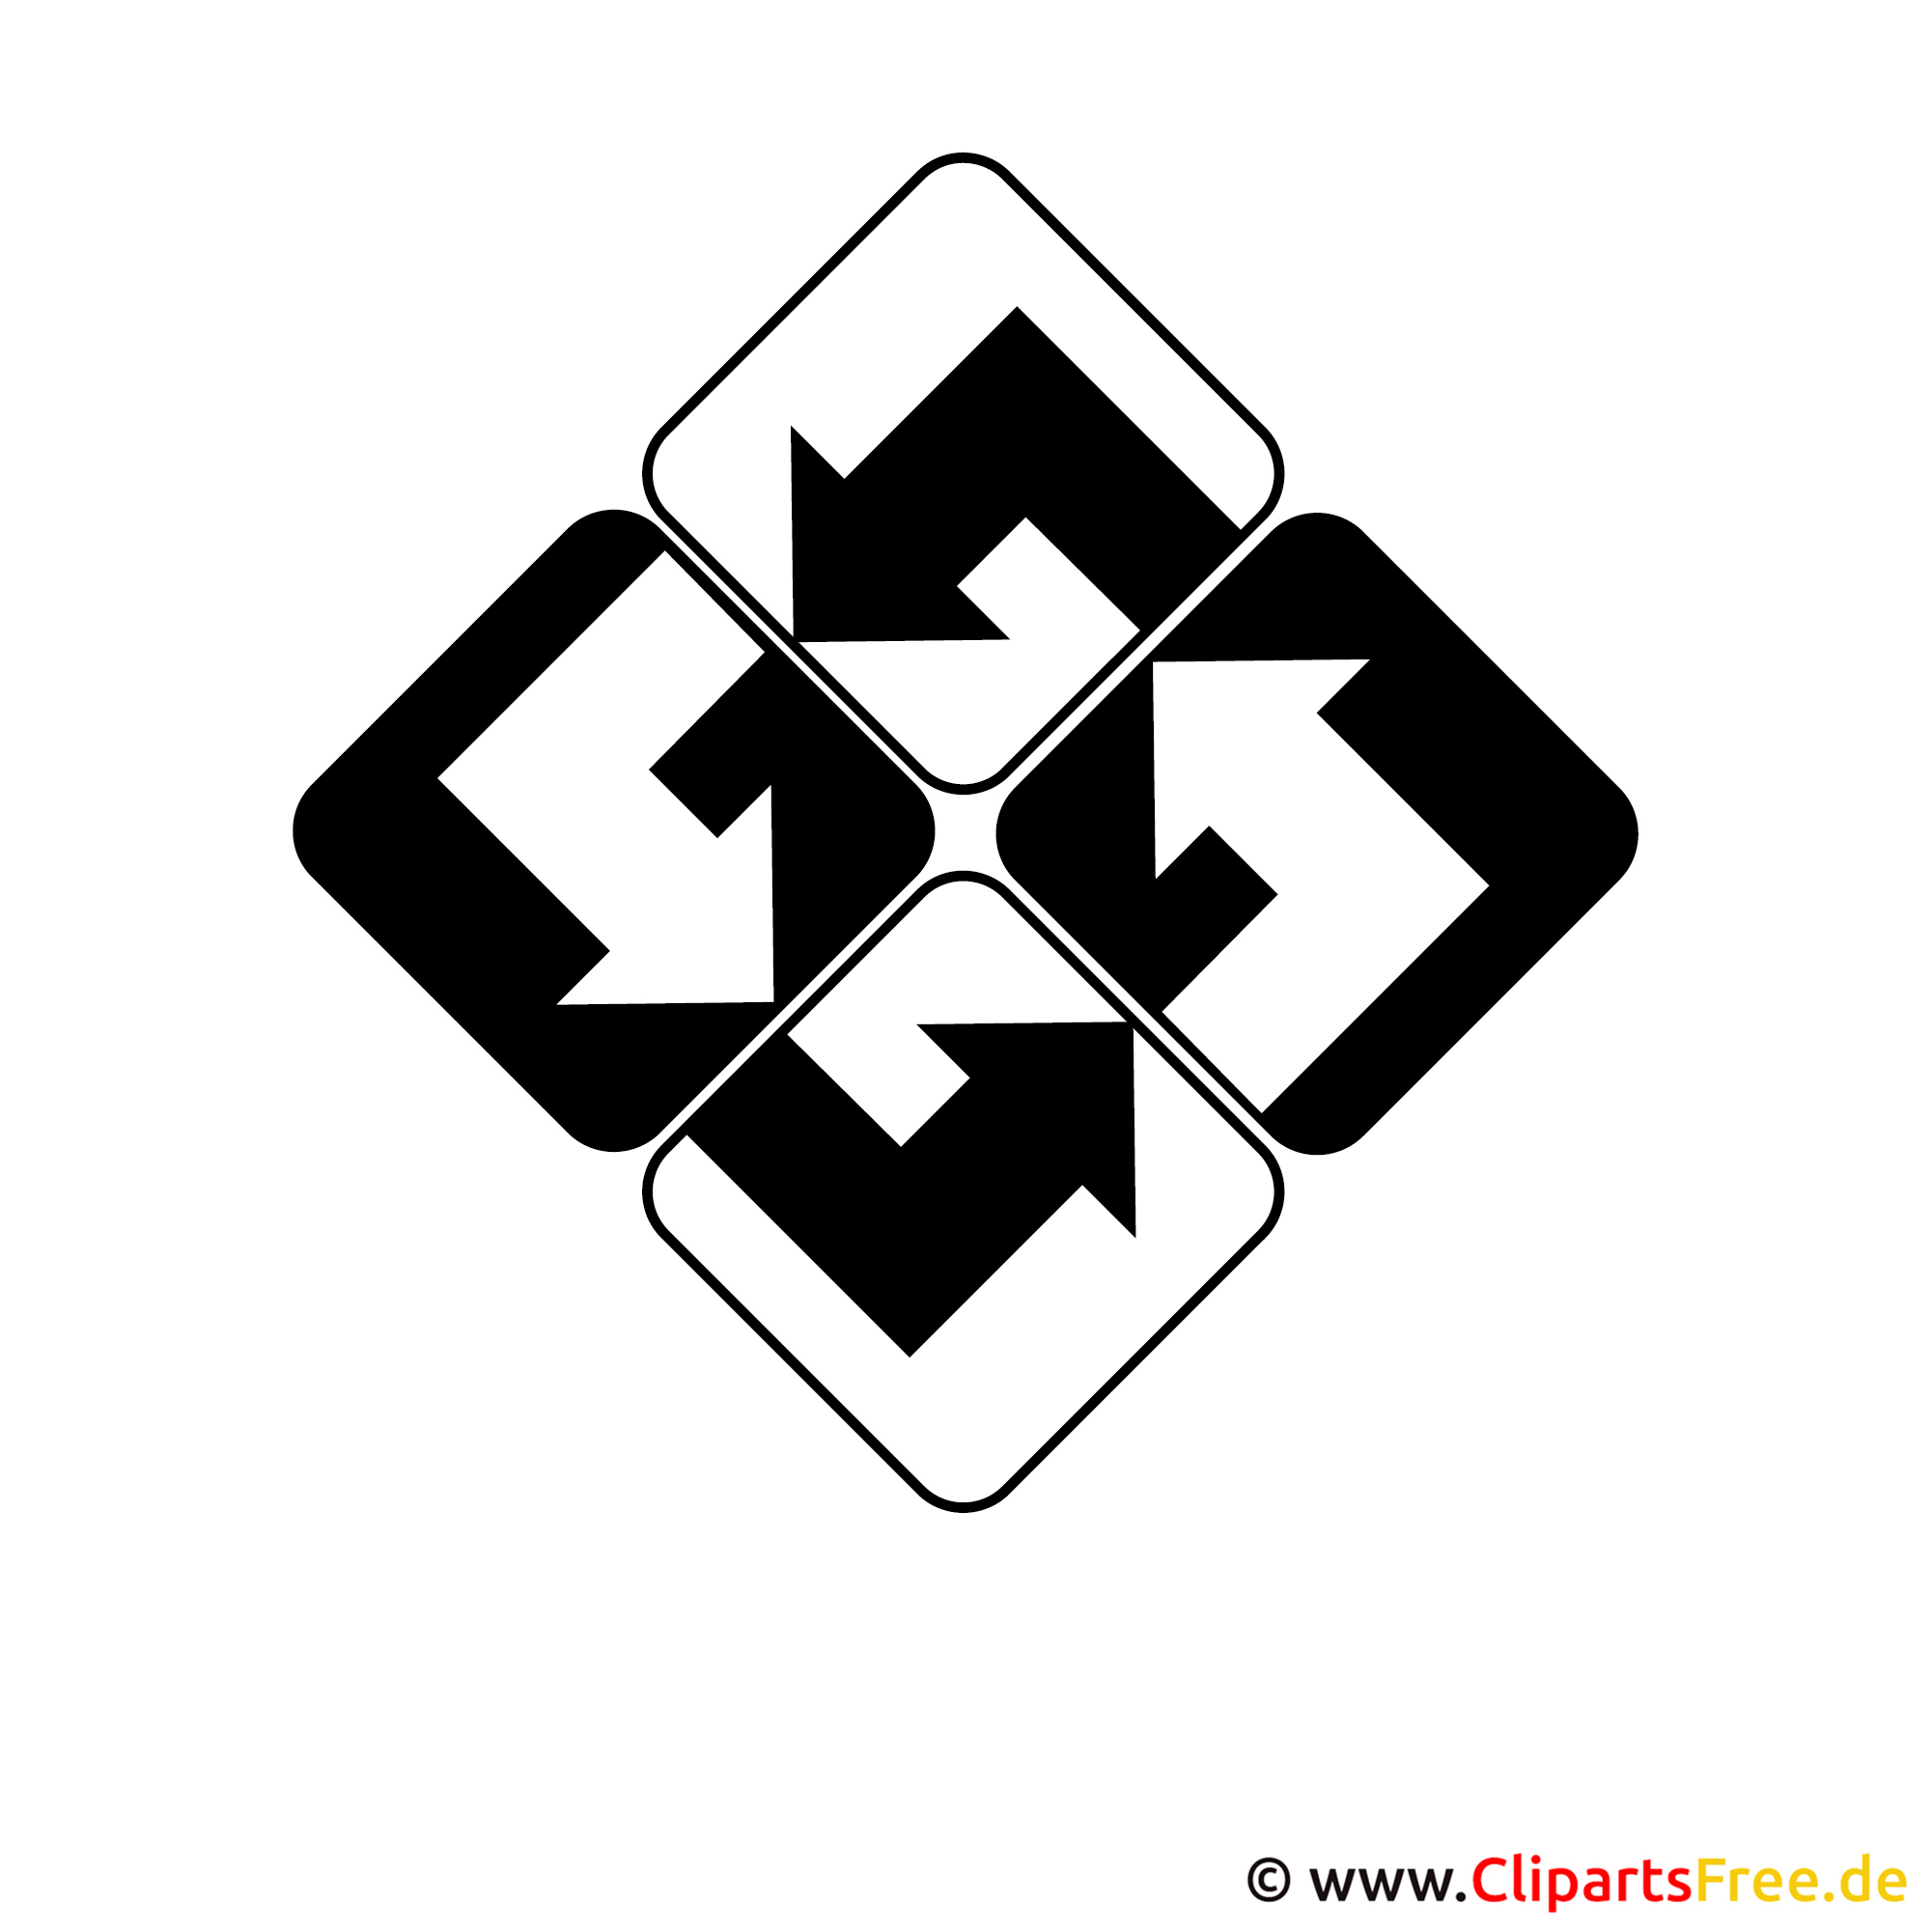 using clipart for business logo - photo #48